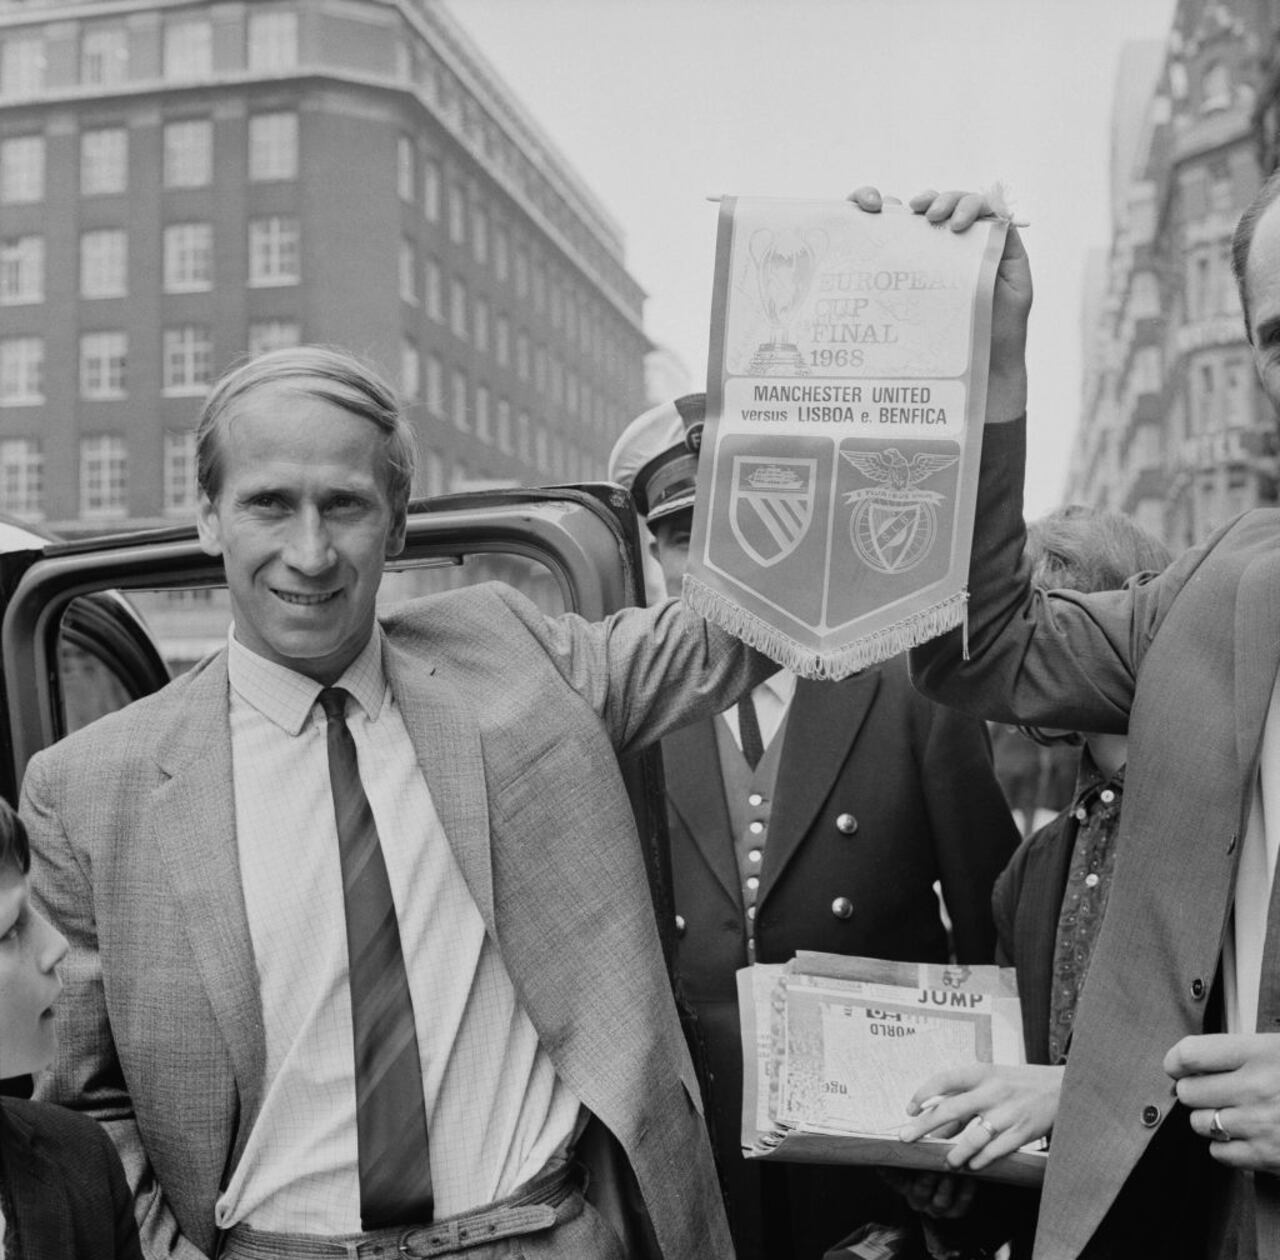 English soccer player Bobby Charlton of Manchester United FC holding a commemorative pennant of the European Cup final against SL Benfica, London, UK, 30th May 1968. (Photo by Evening Standard/Hulton Archive/Getty Images)